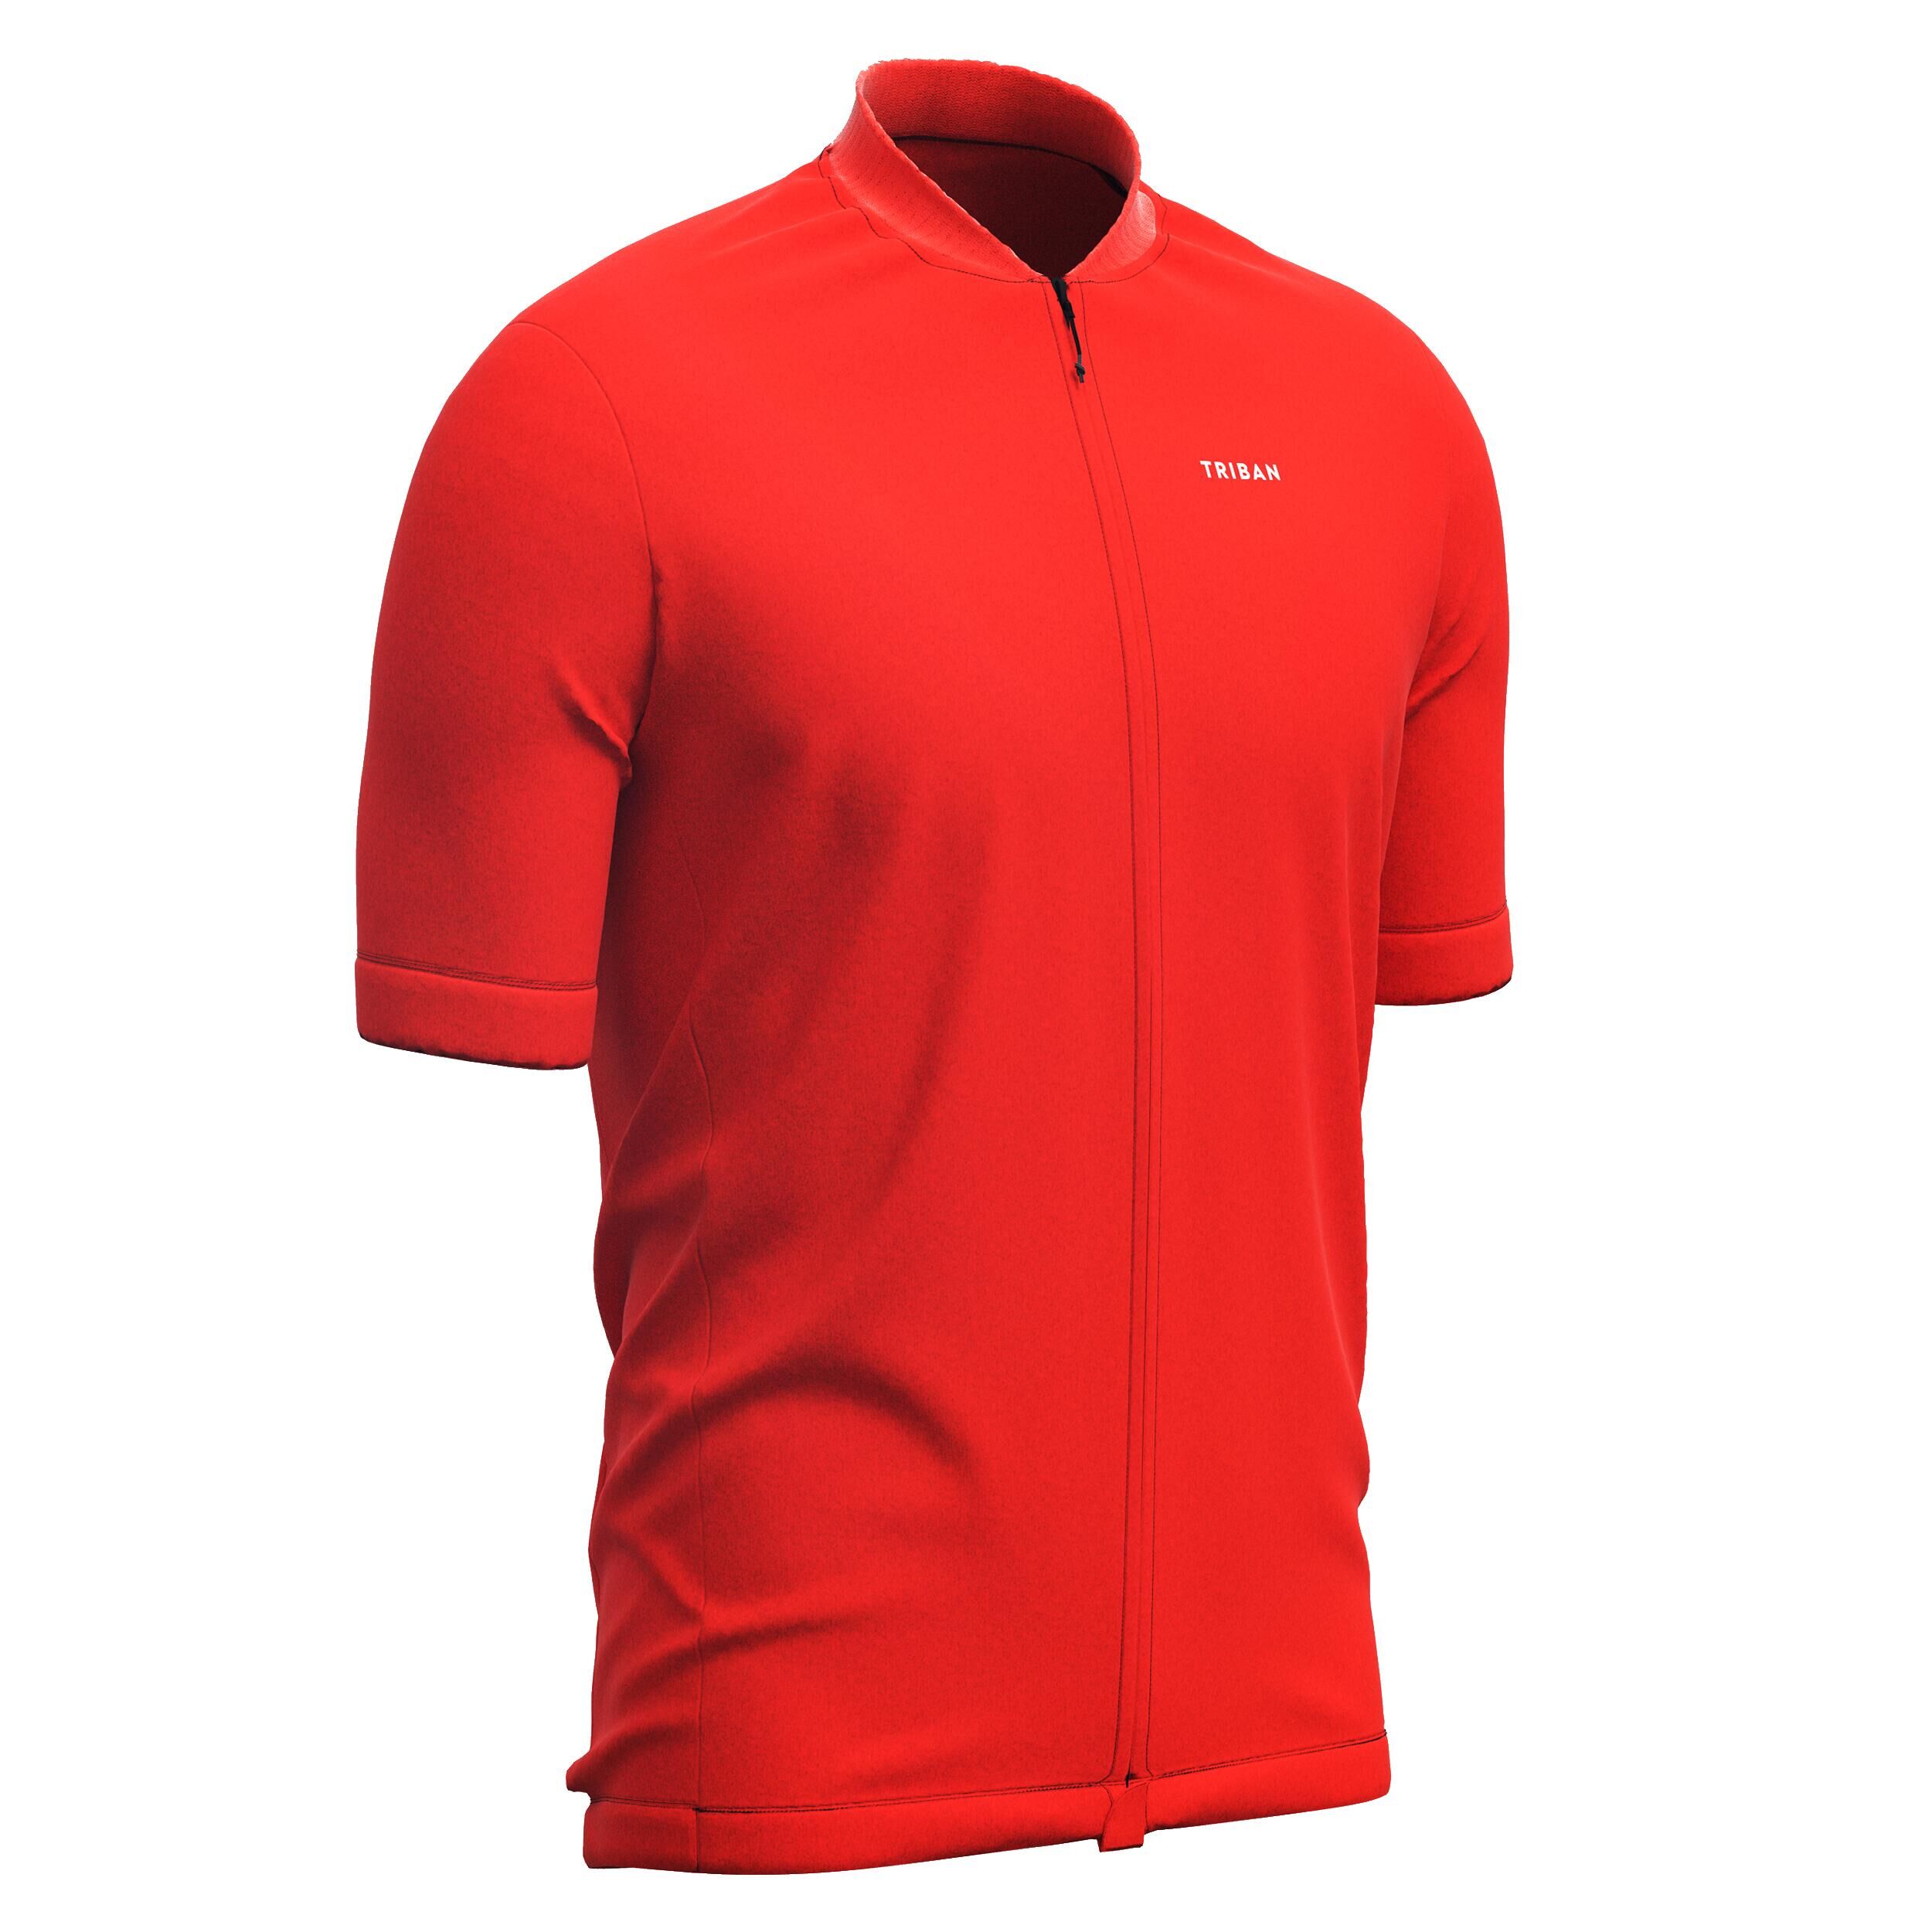 TRIBAN Men's Short-Sleeved Road Cycling Summer Jersey RC100 - Red